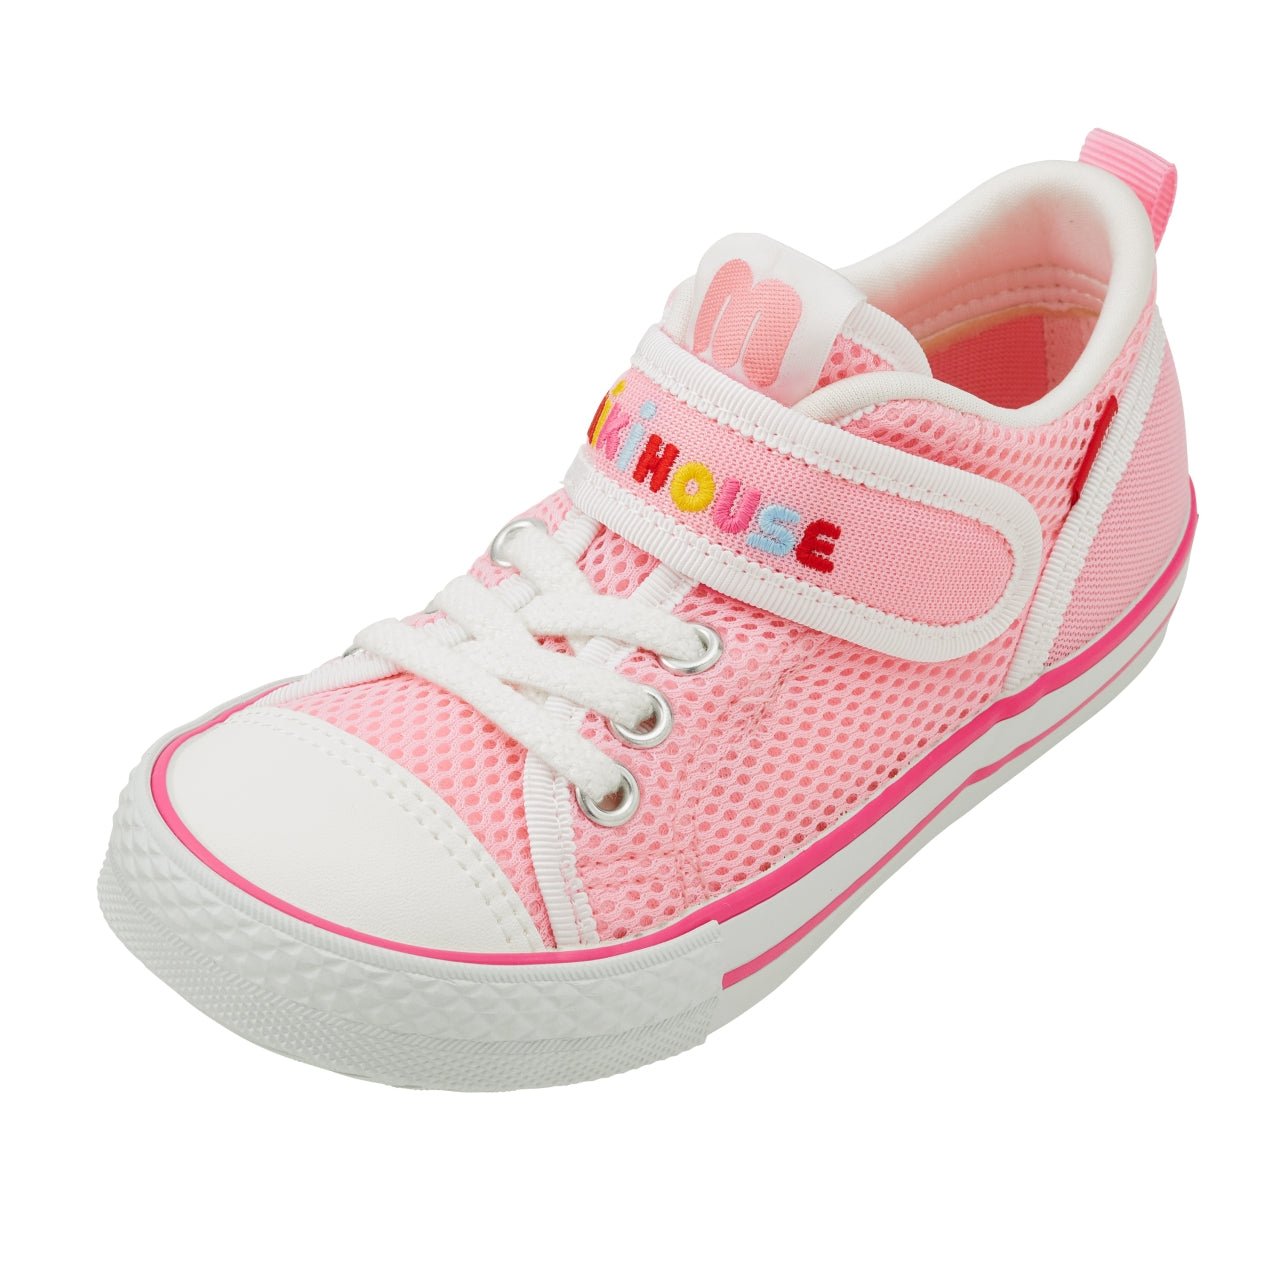 Double Russell Mesh Sneakers for Kids - Strawberry Milk